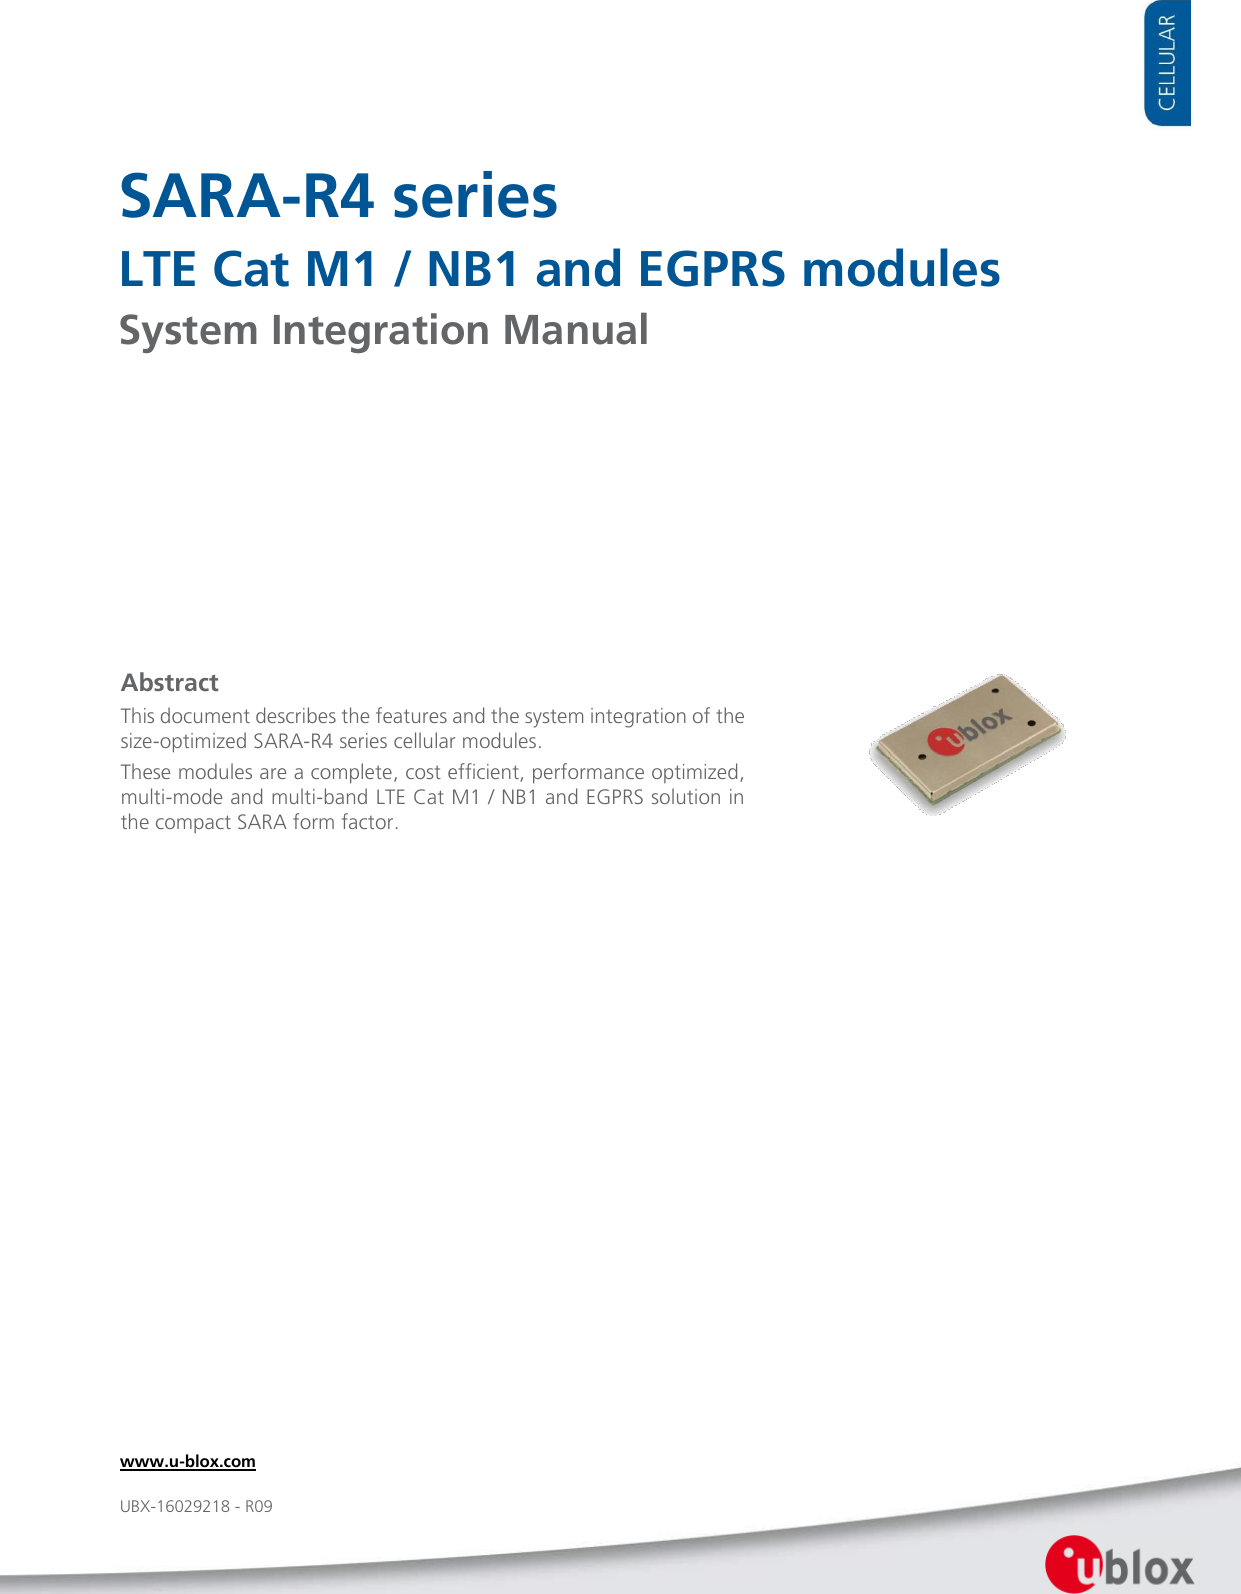     SARA-R4 series LTE Cat M1 / NB1 and EGPRS modules System Integration Manual               Abstract This document describes the features and the system integration of the size-optimized SARA-R4 series cellular modules. These modules are a complete, cost efficient, performance optimized, multi-mode and multi-band LTE Cat M1 / NB1 and EGPRS solution in the compact SARA form factor. www.u-blox.com UBX-16029218 - R09 